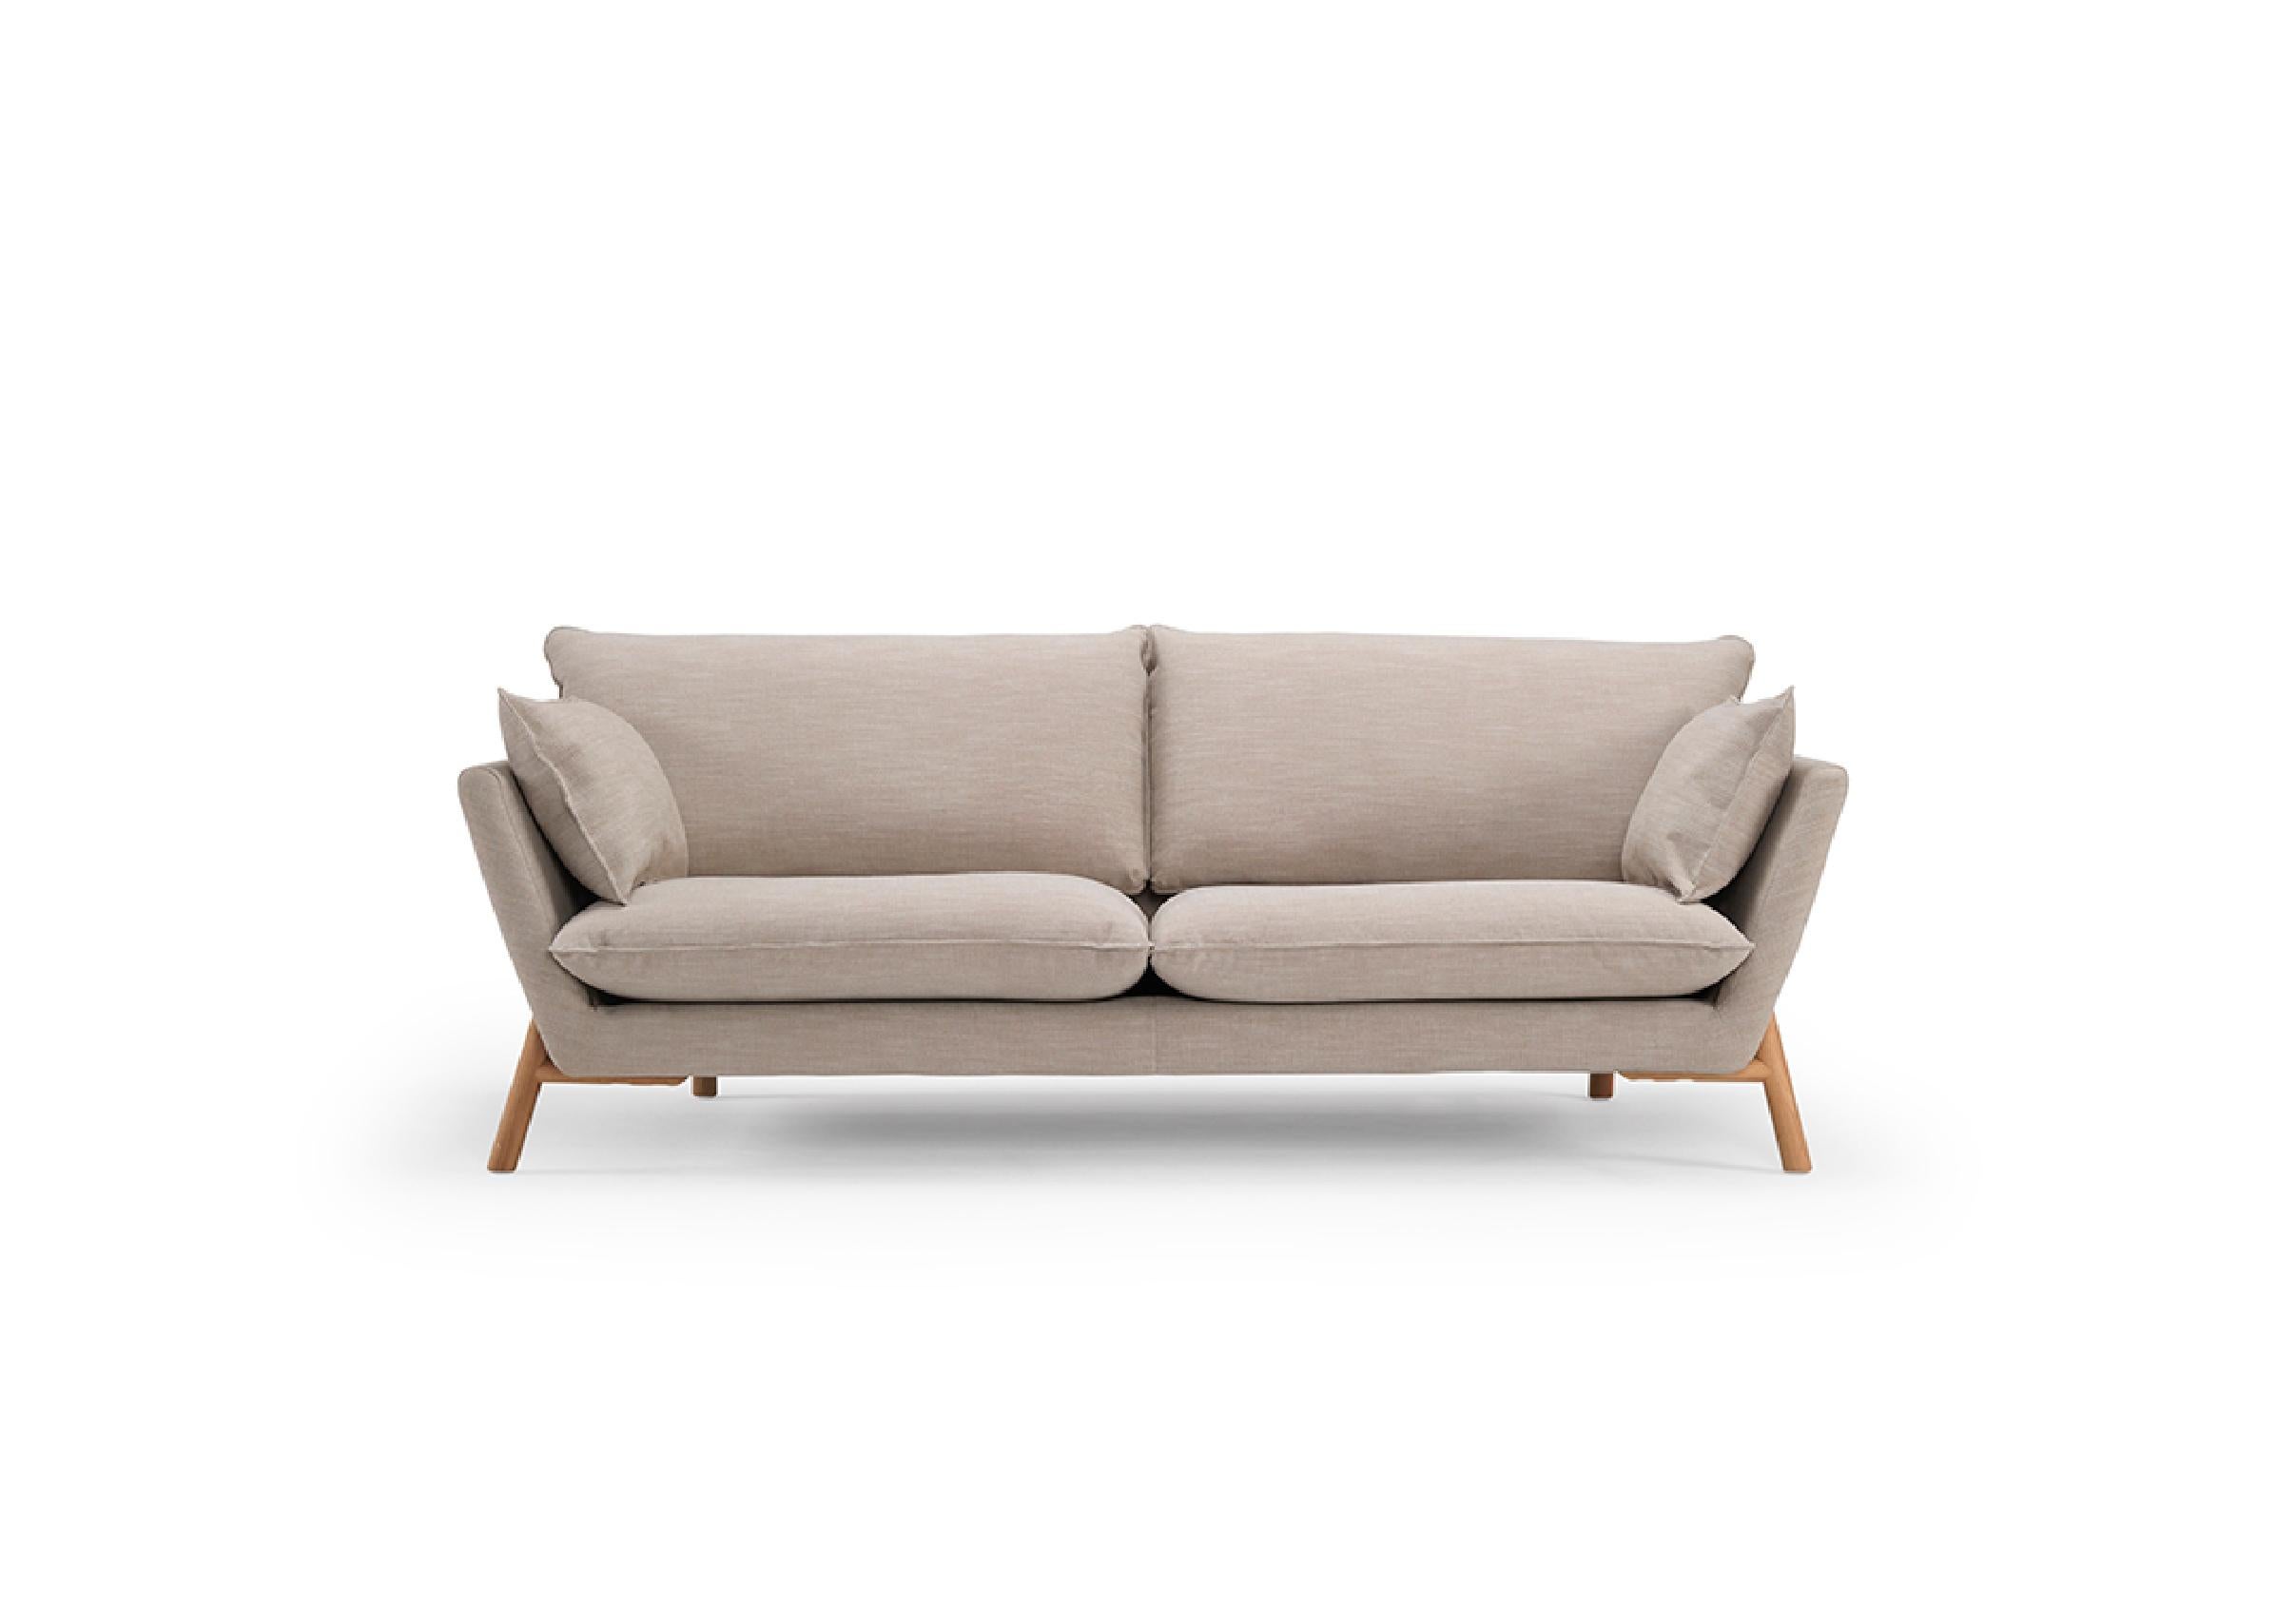 Modern Hayche Nave 2 Seater Sofa - Brown, UK, Made to Order For Sale